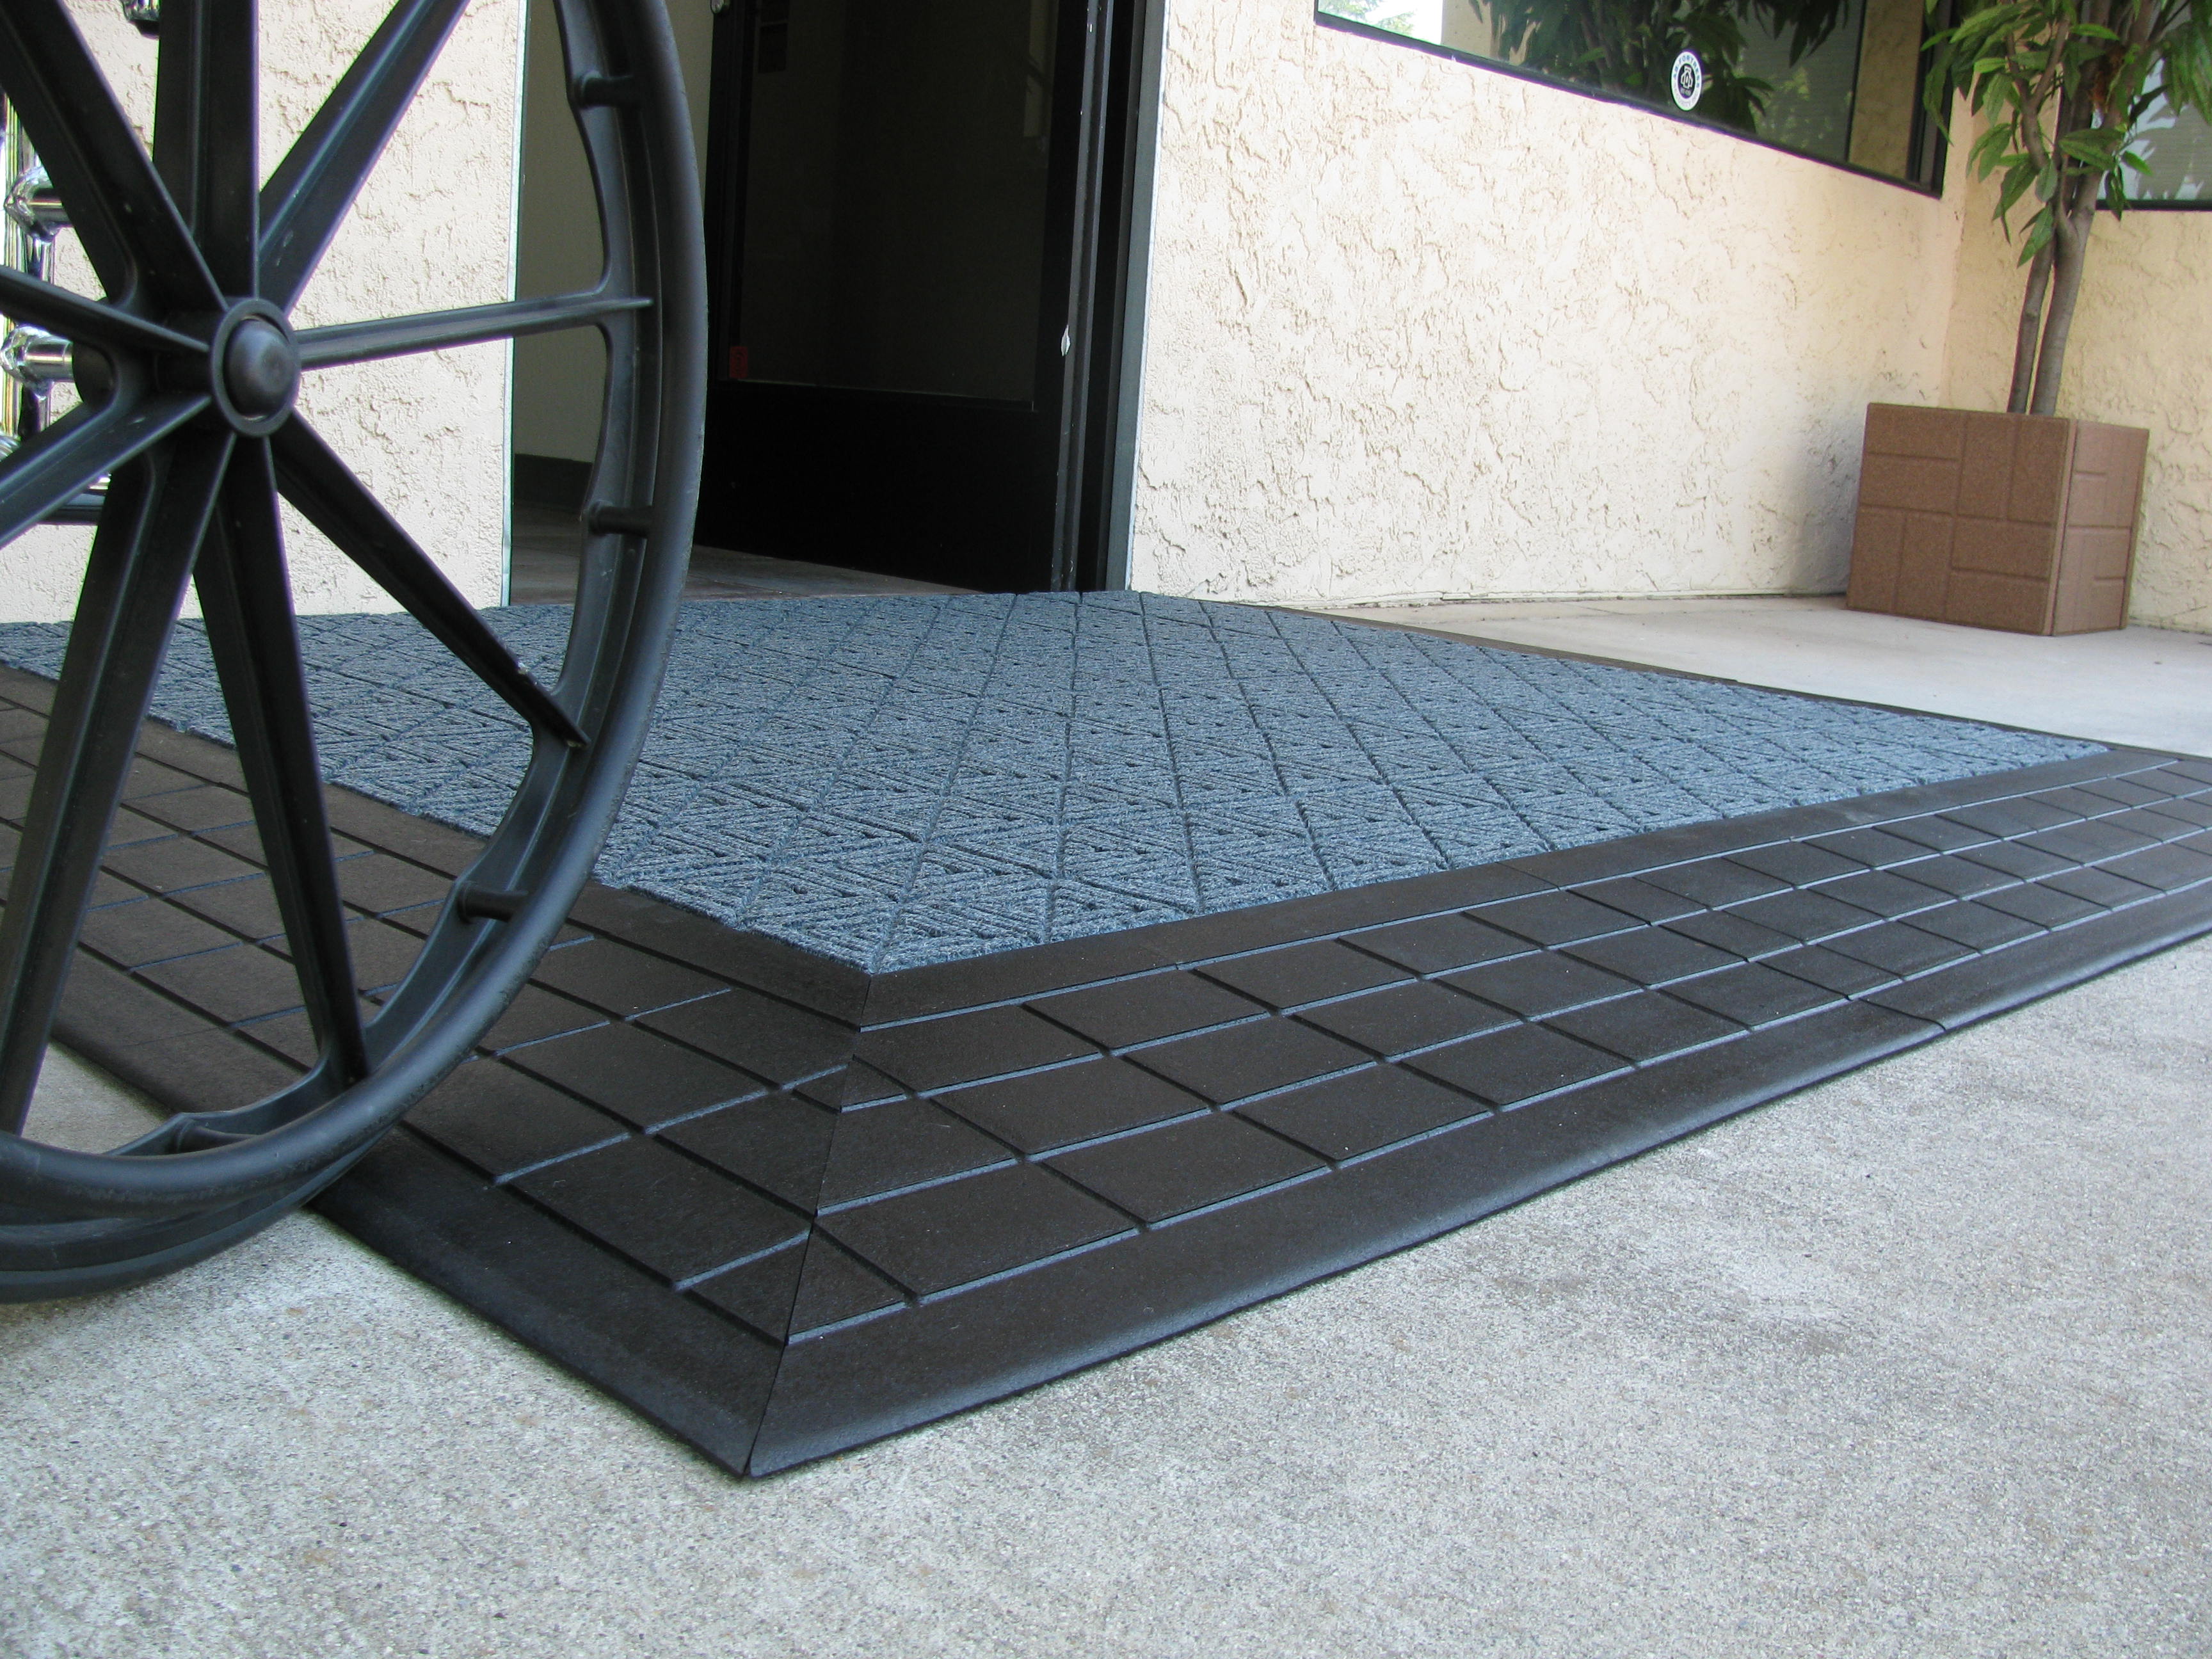 EntryLevel Landing SafePath Products for ADA wheelchair access Threshold ramps Rubber High Rise buildings Multi Family Housing EZ-Access